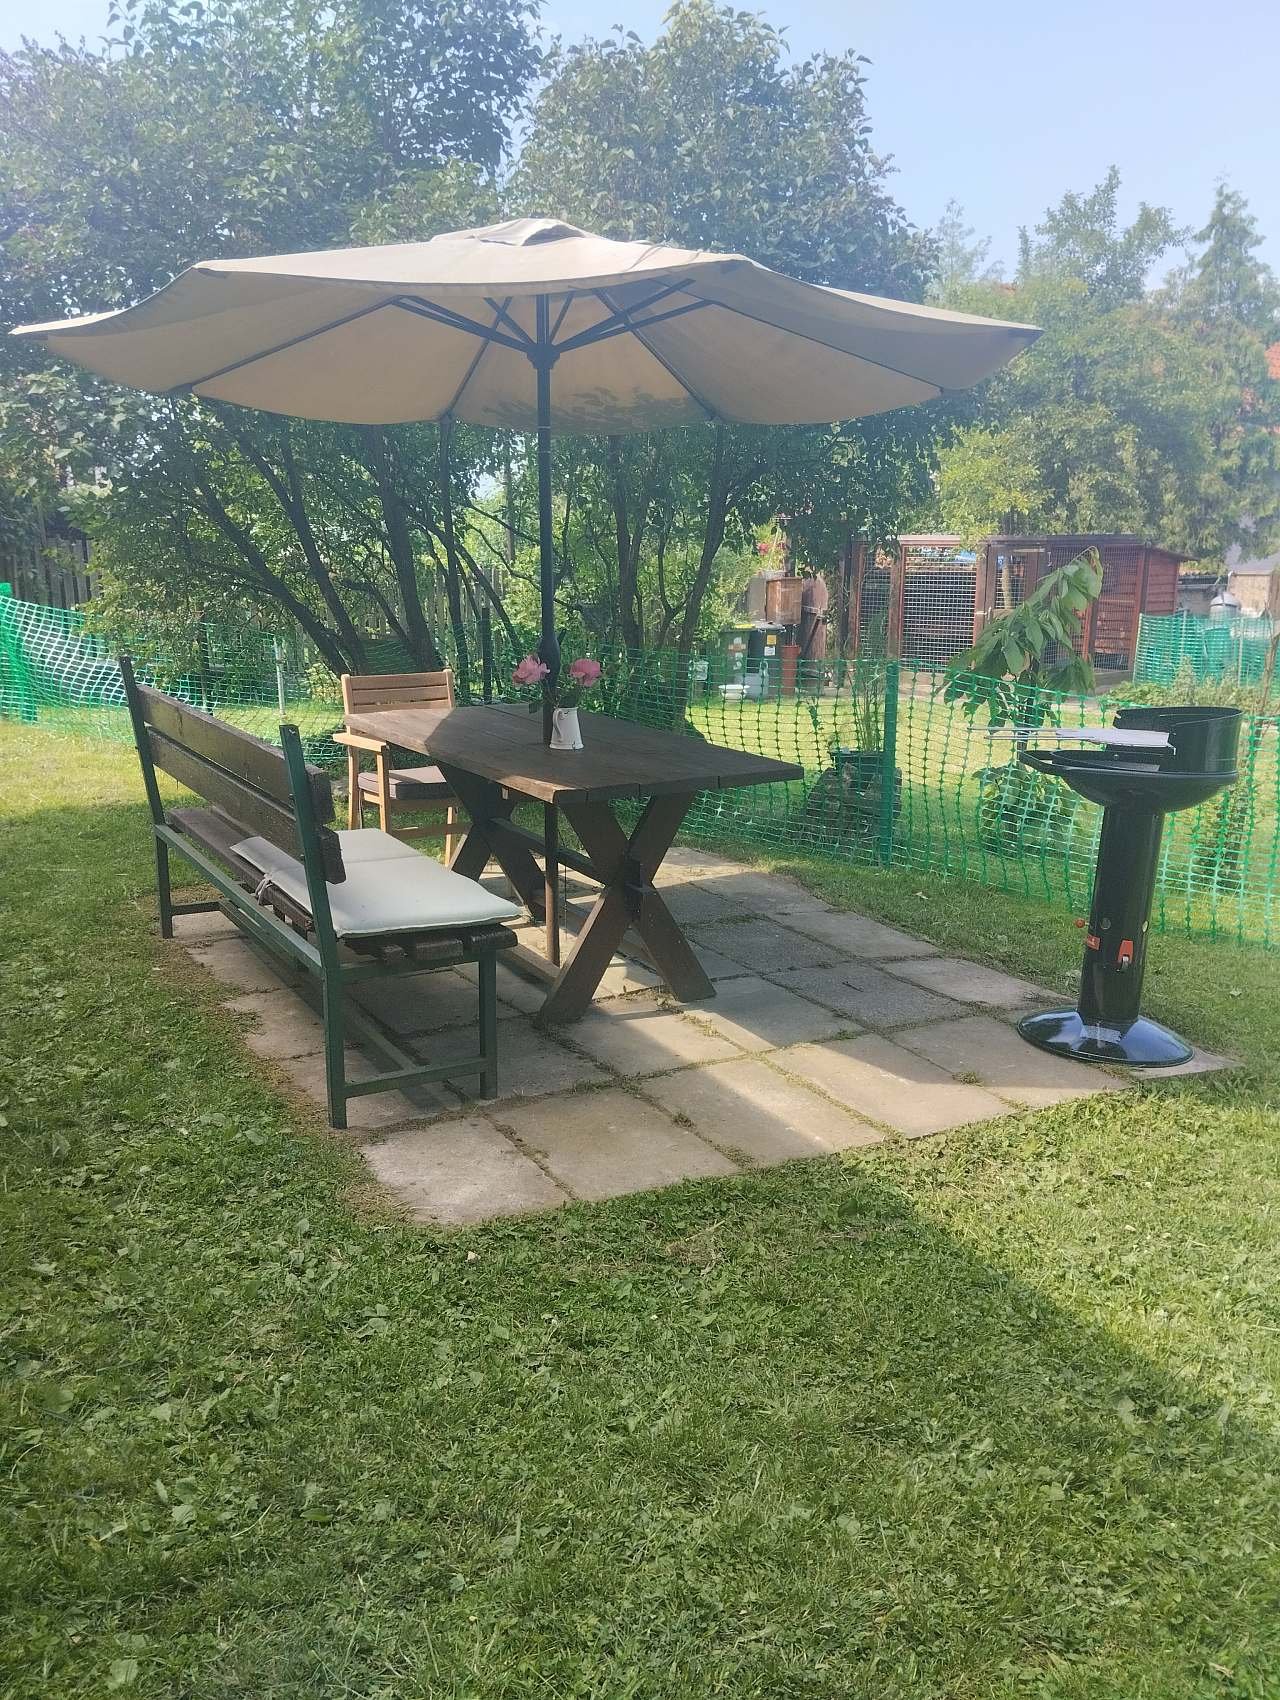 Chata Velké Popovice - sitting area with grill